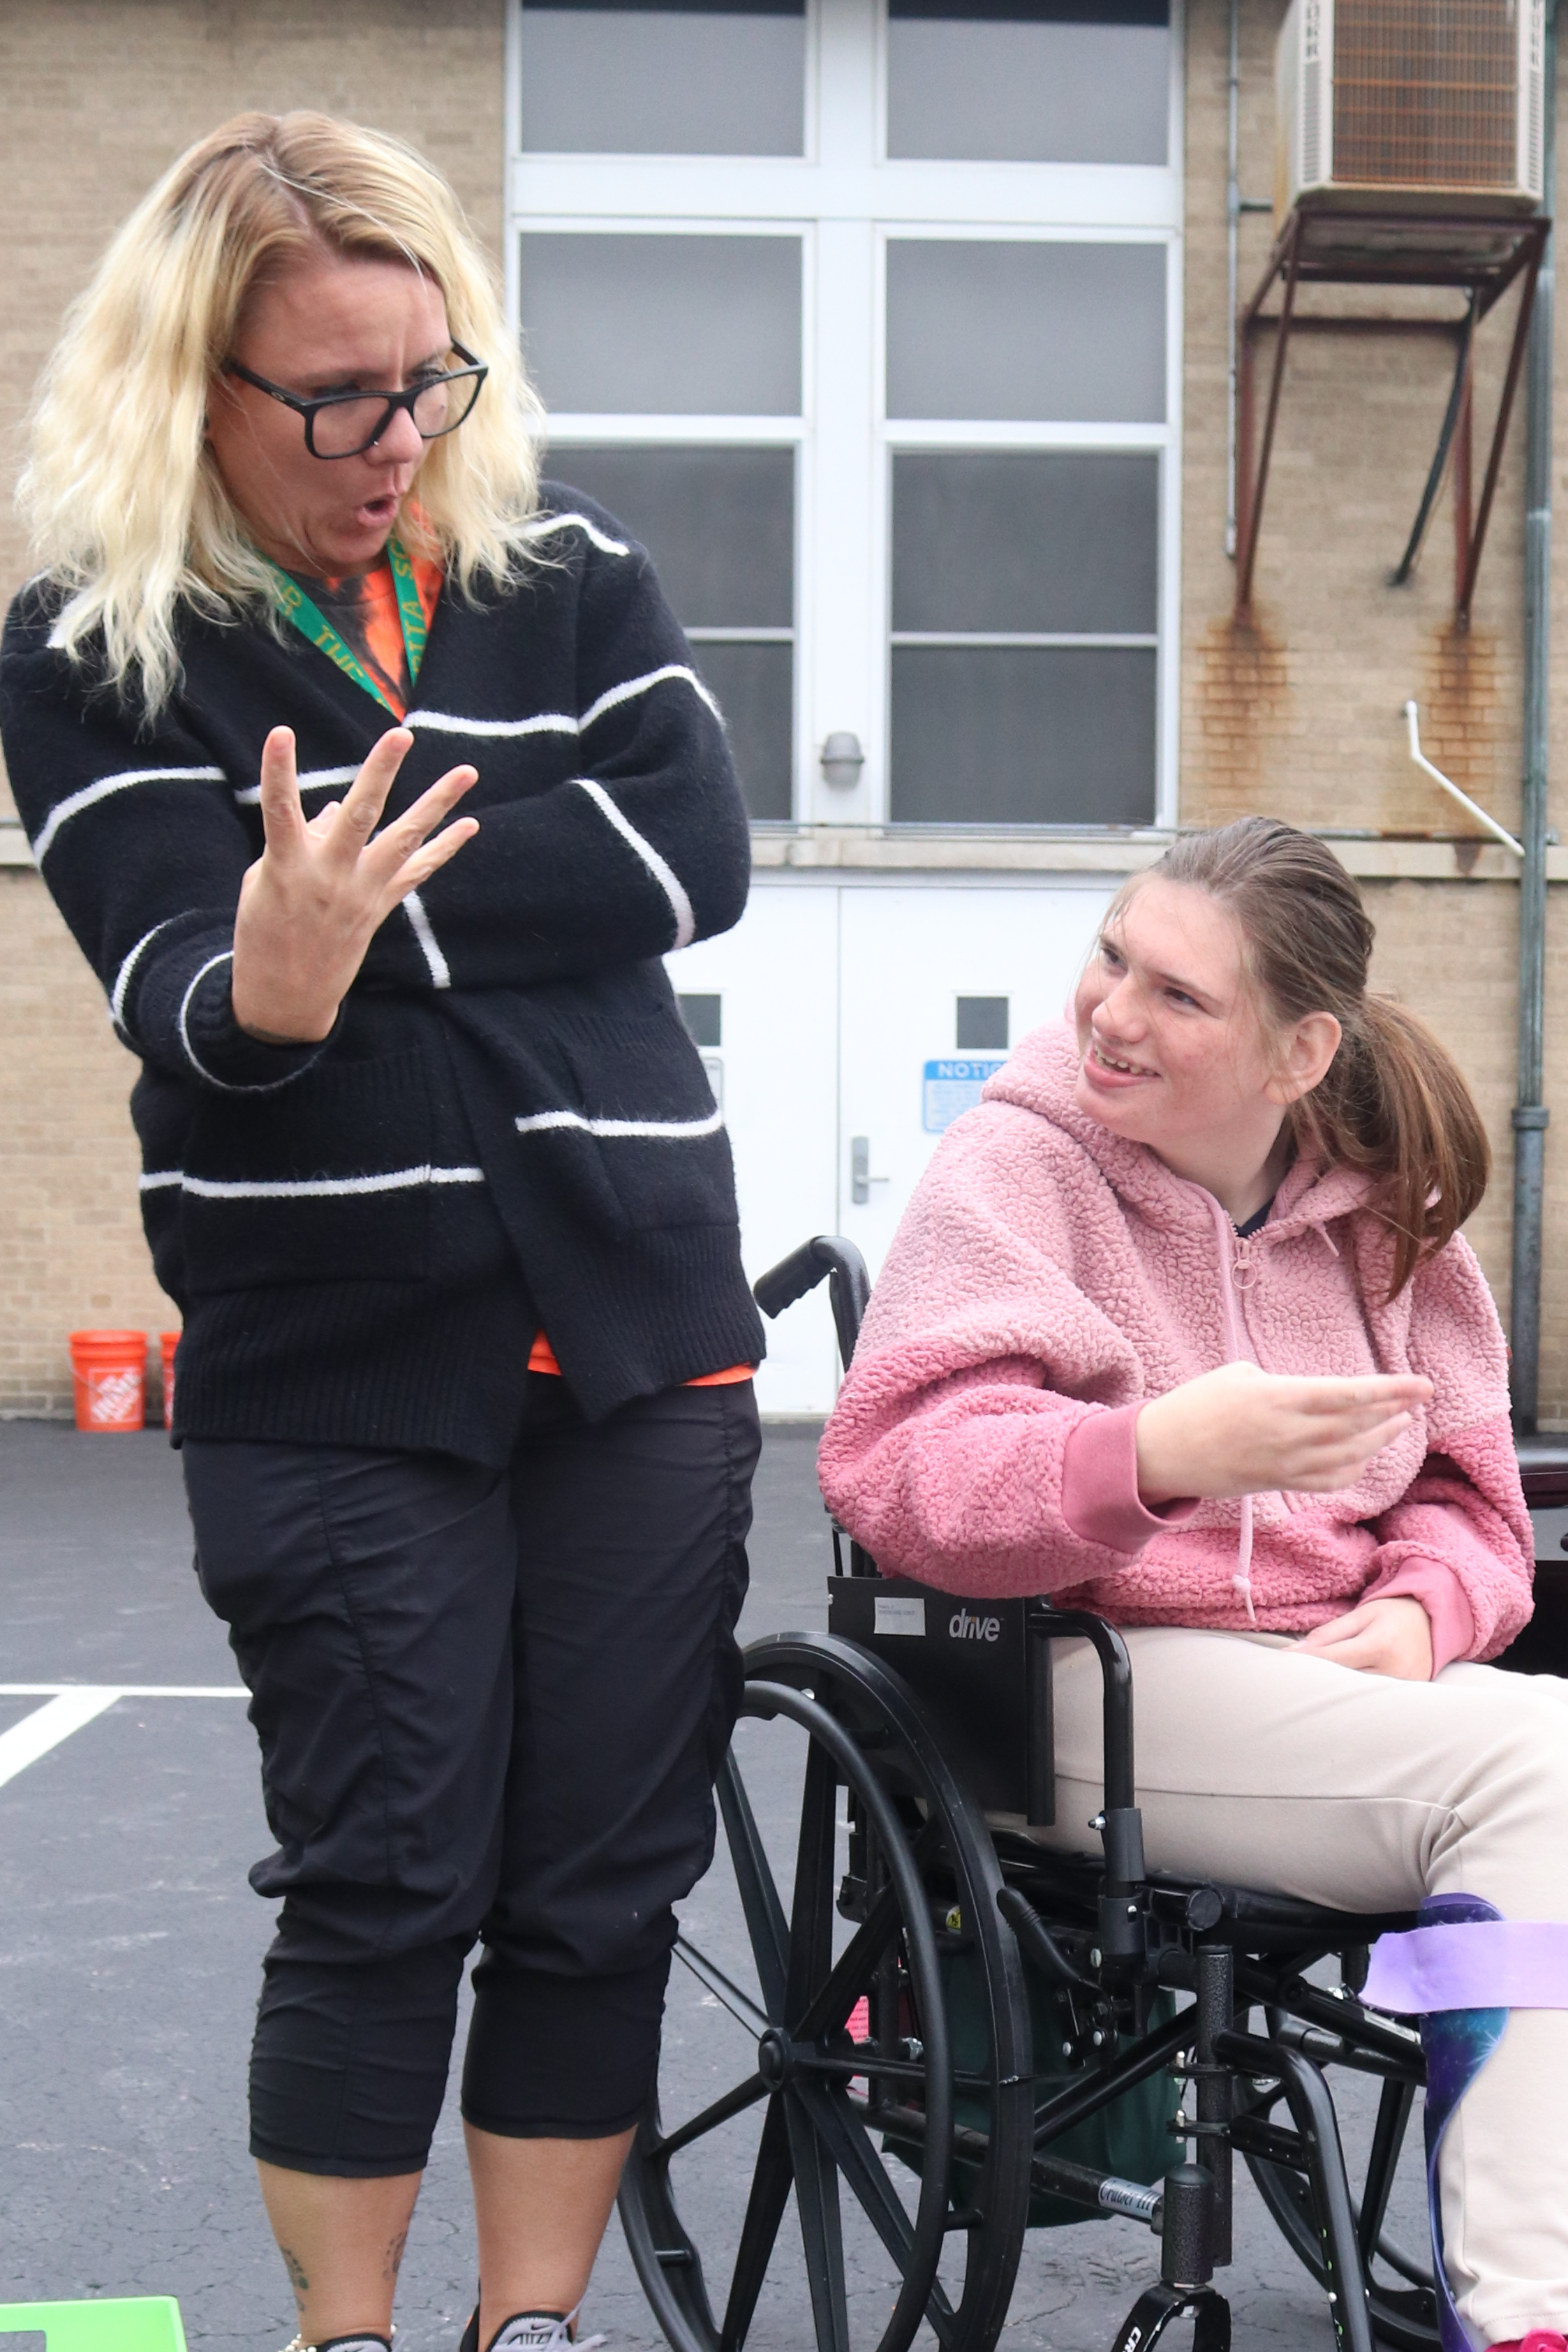 a high school staff with a female student with wheelchair